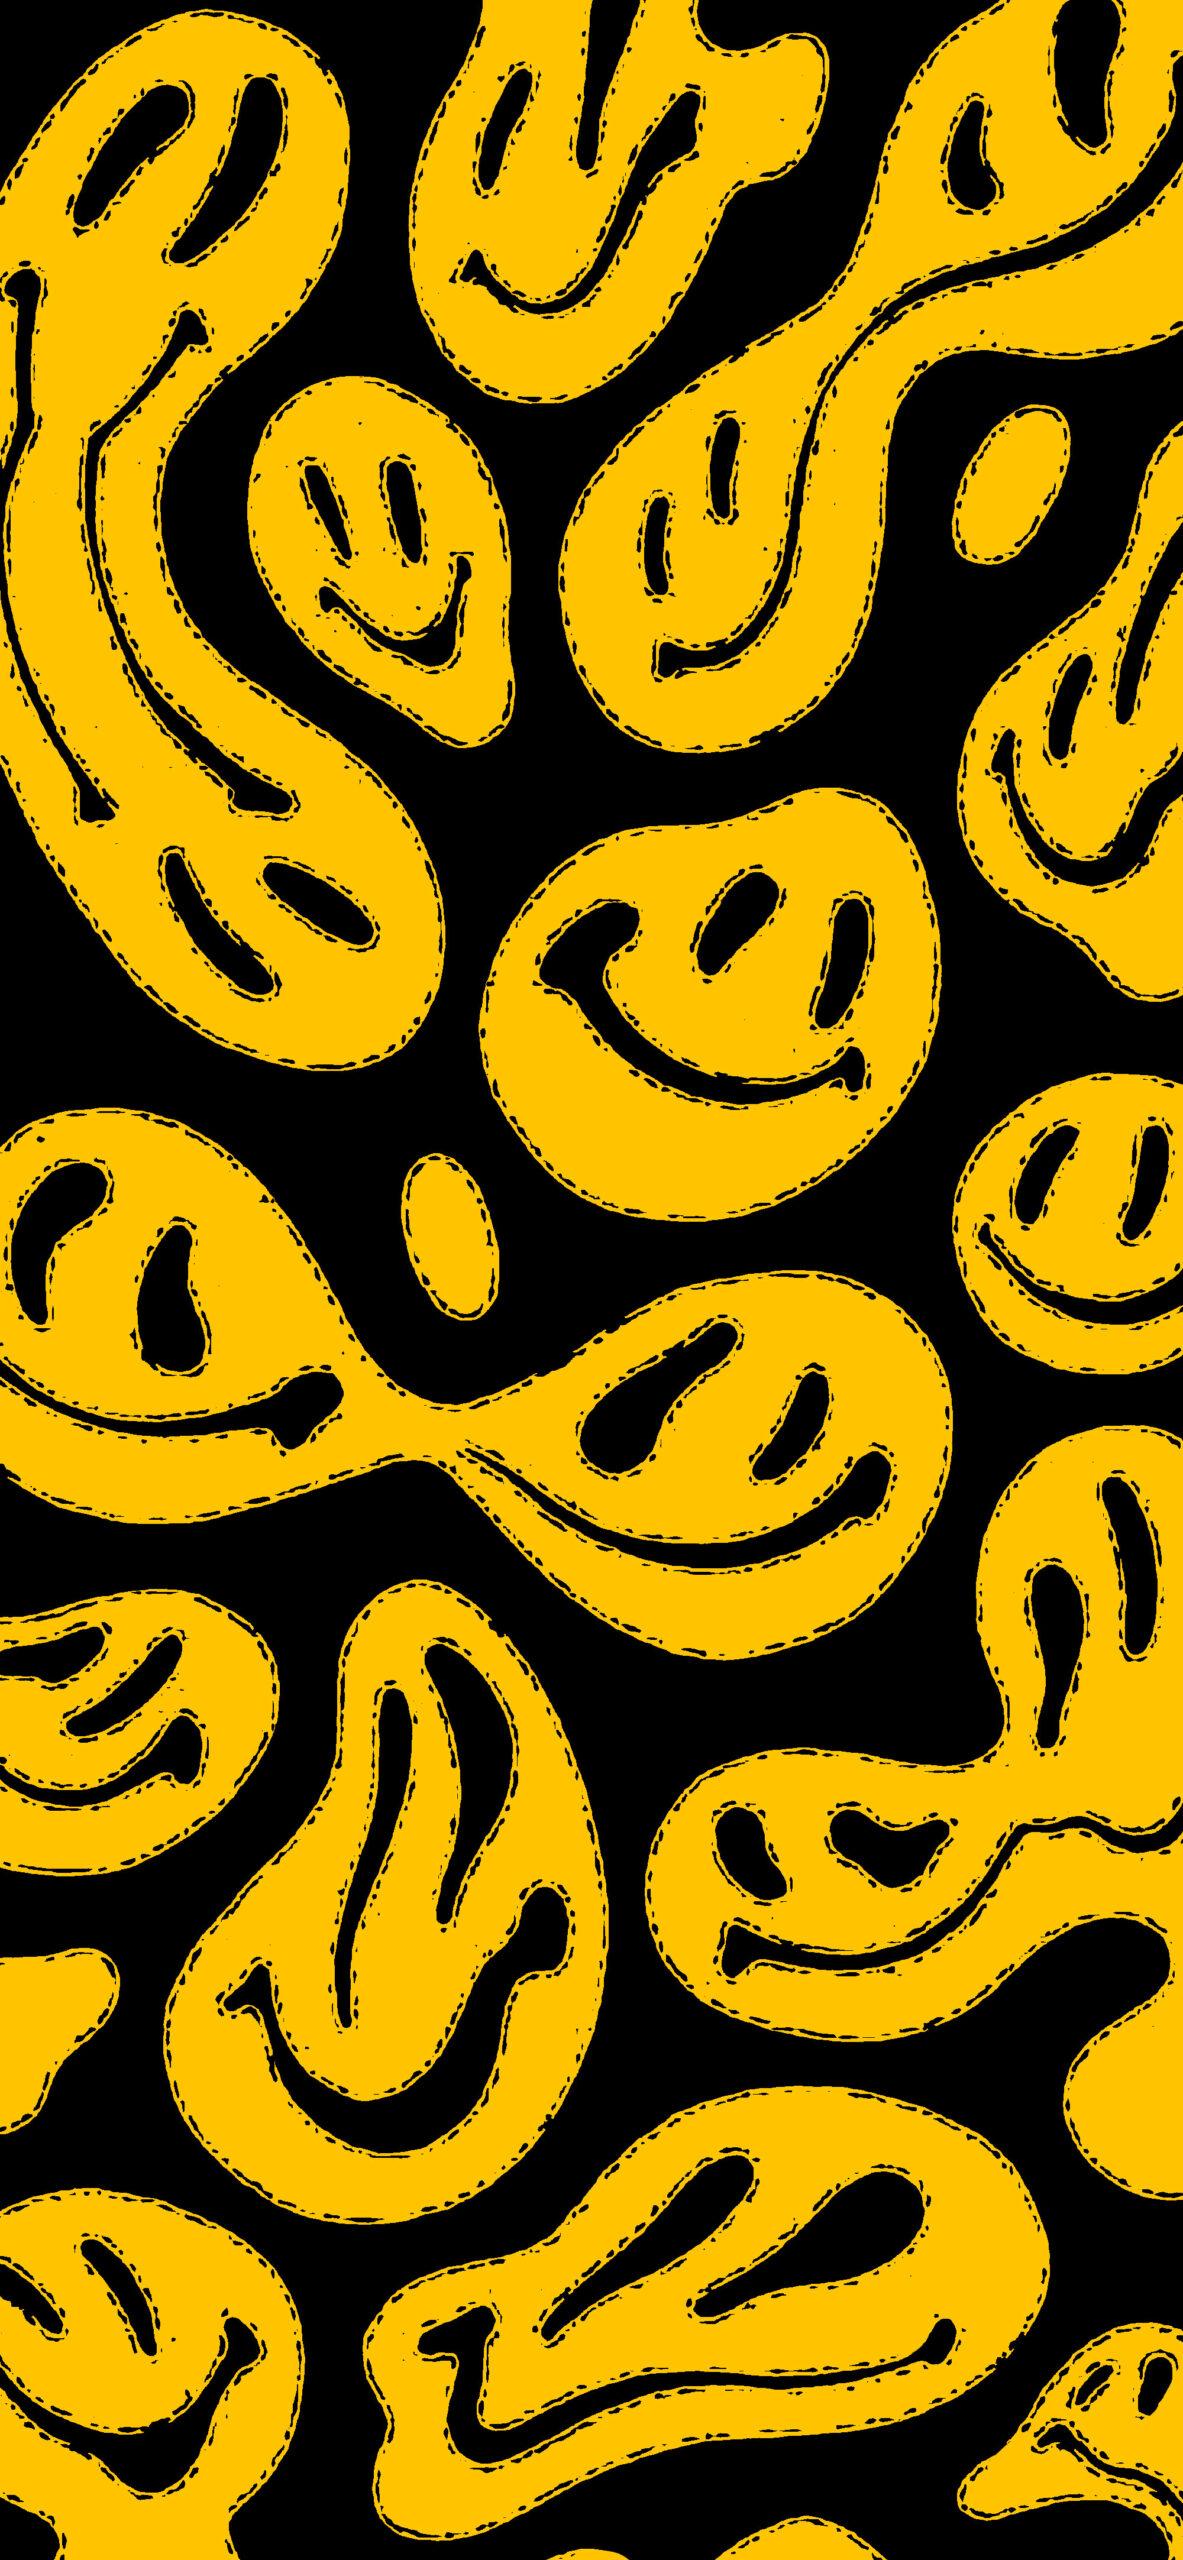 Blue Smiley Face Wallpaper  NawPic